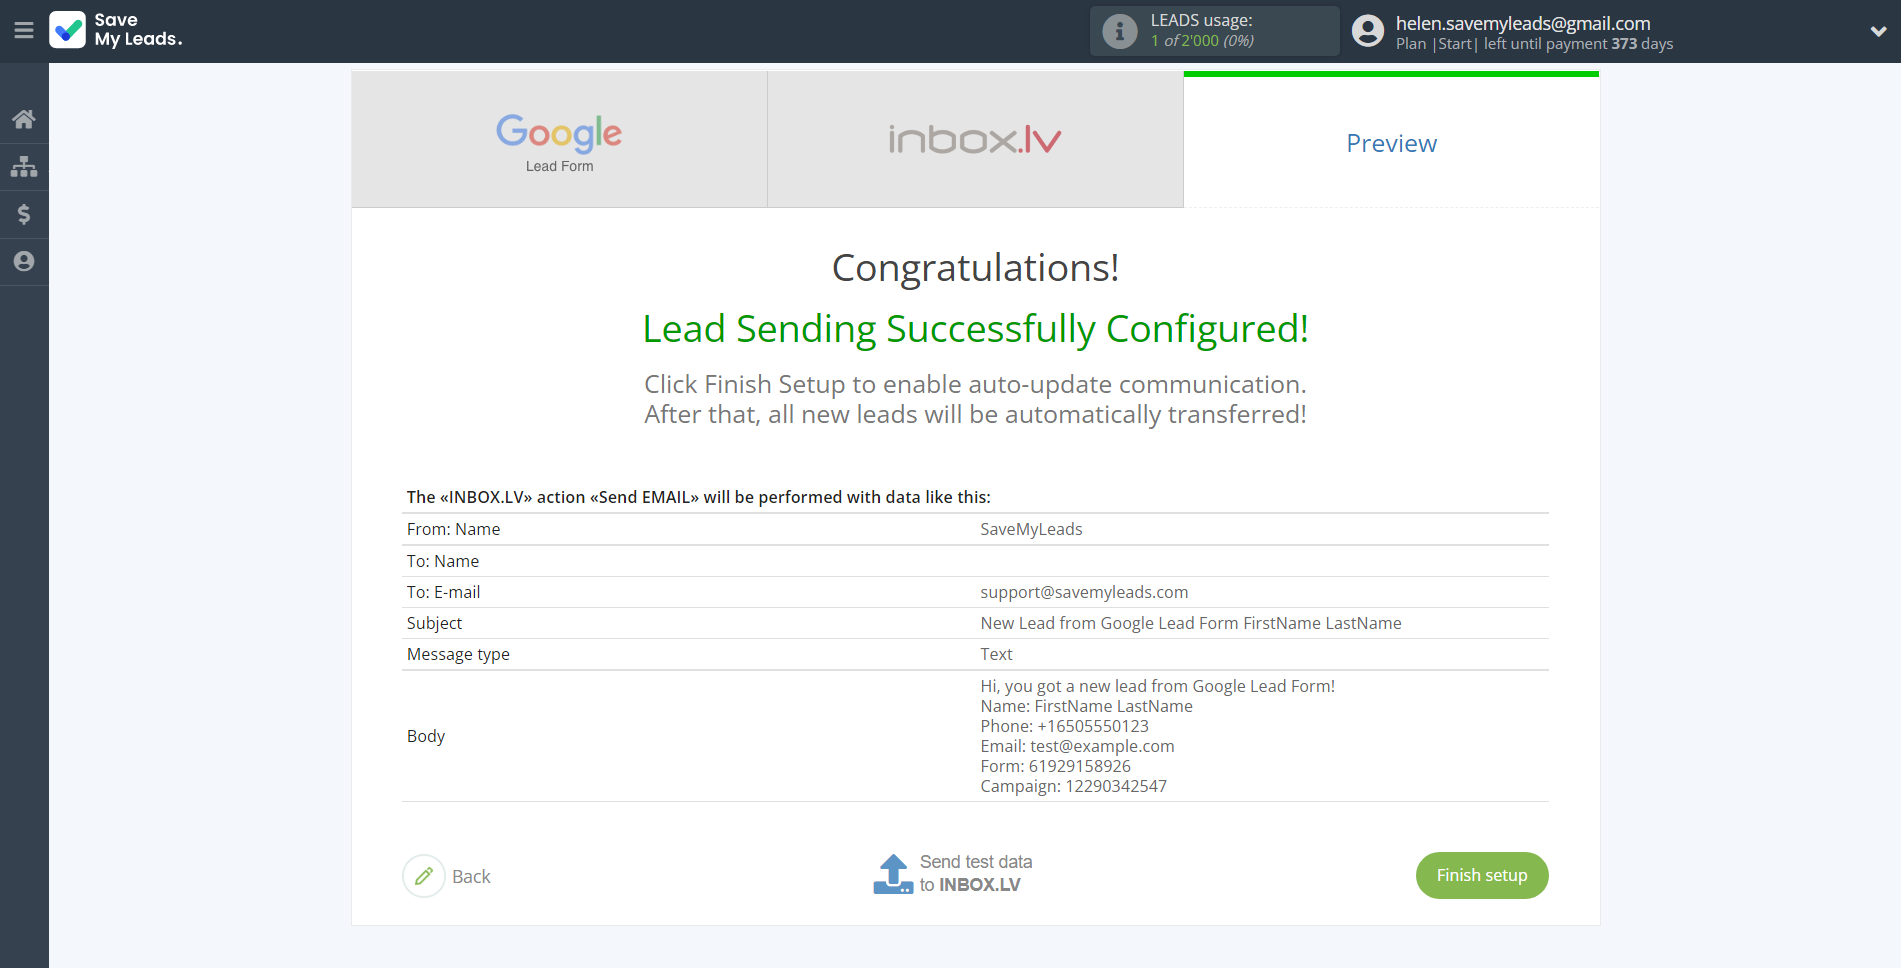 How to Connect Google Lead Form with INBOX.LV | Test data